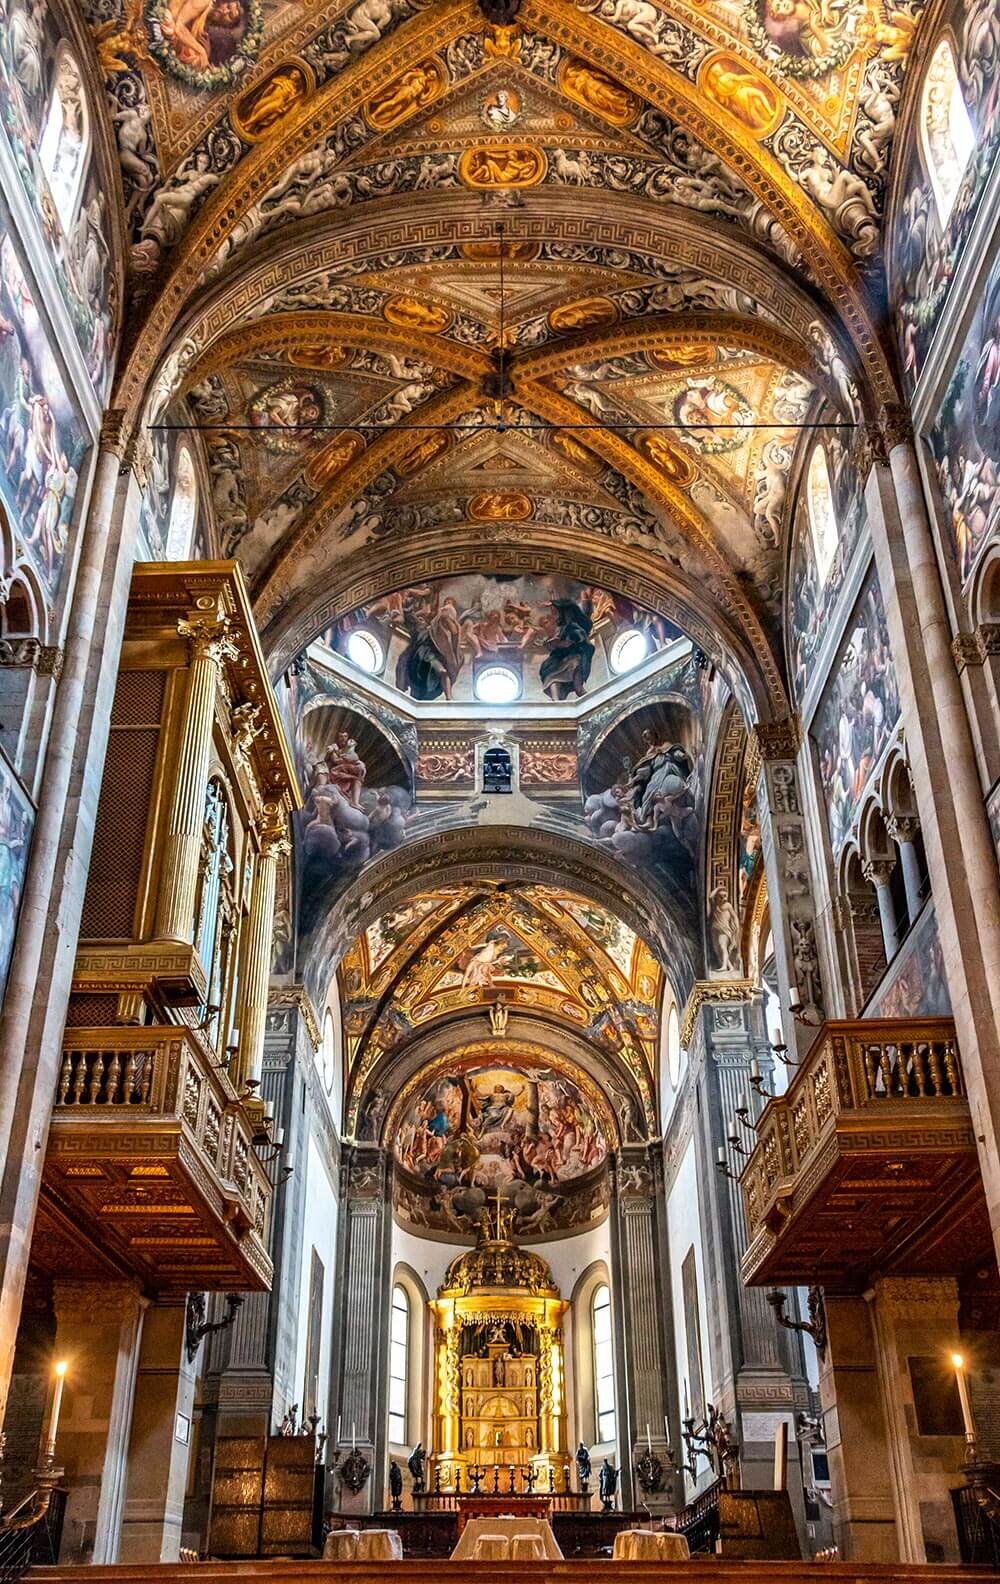 The Beauty of the Parma Cathedral